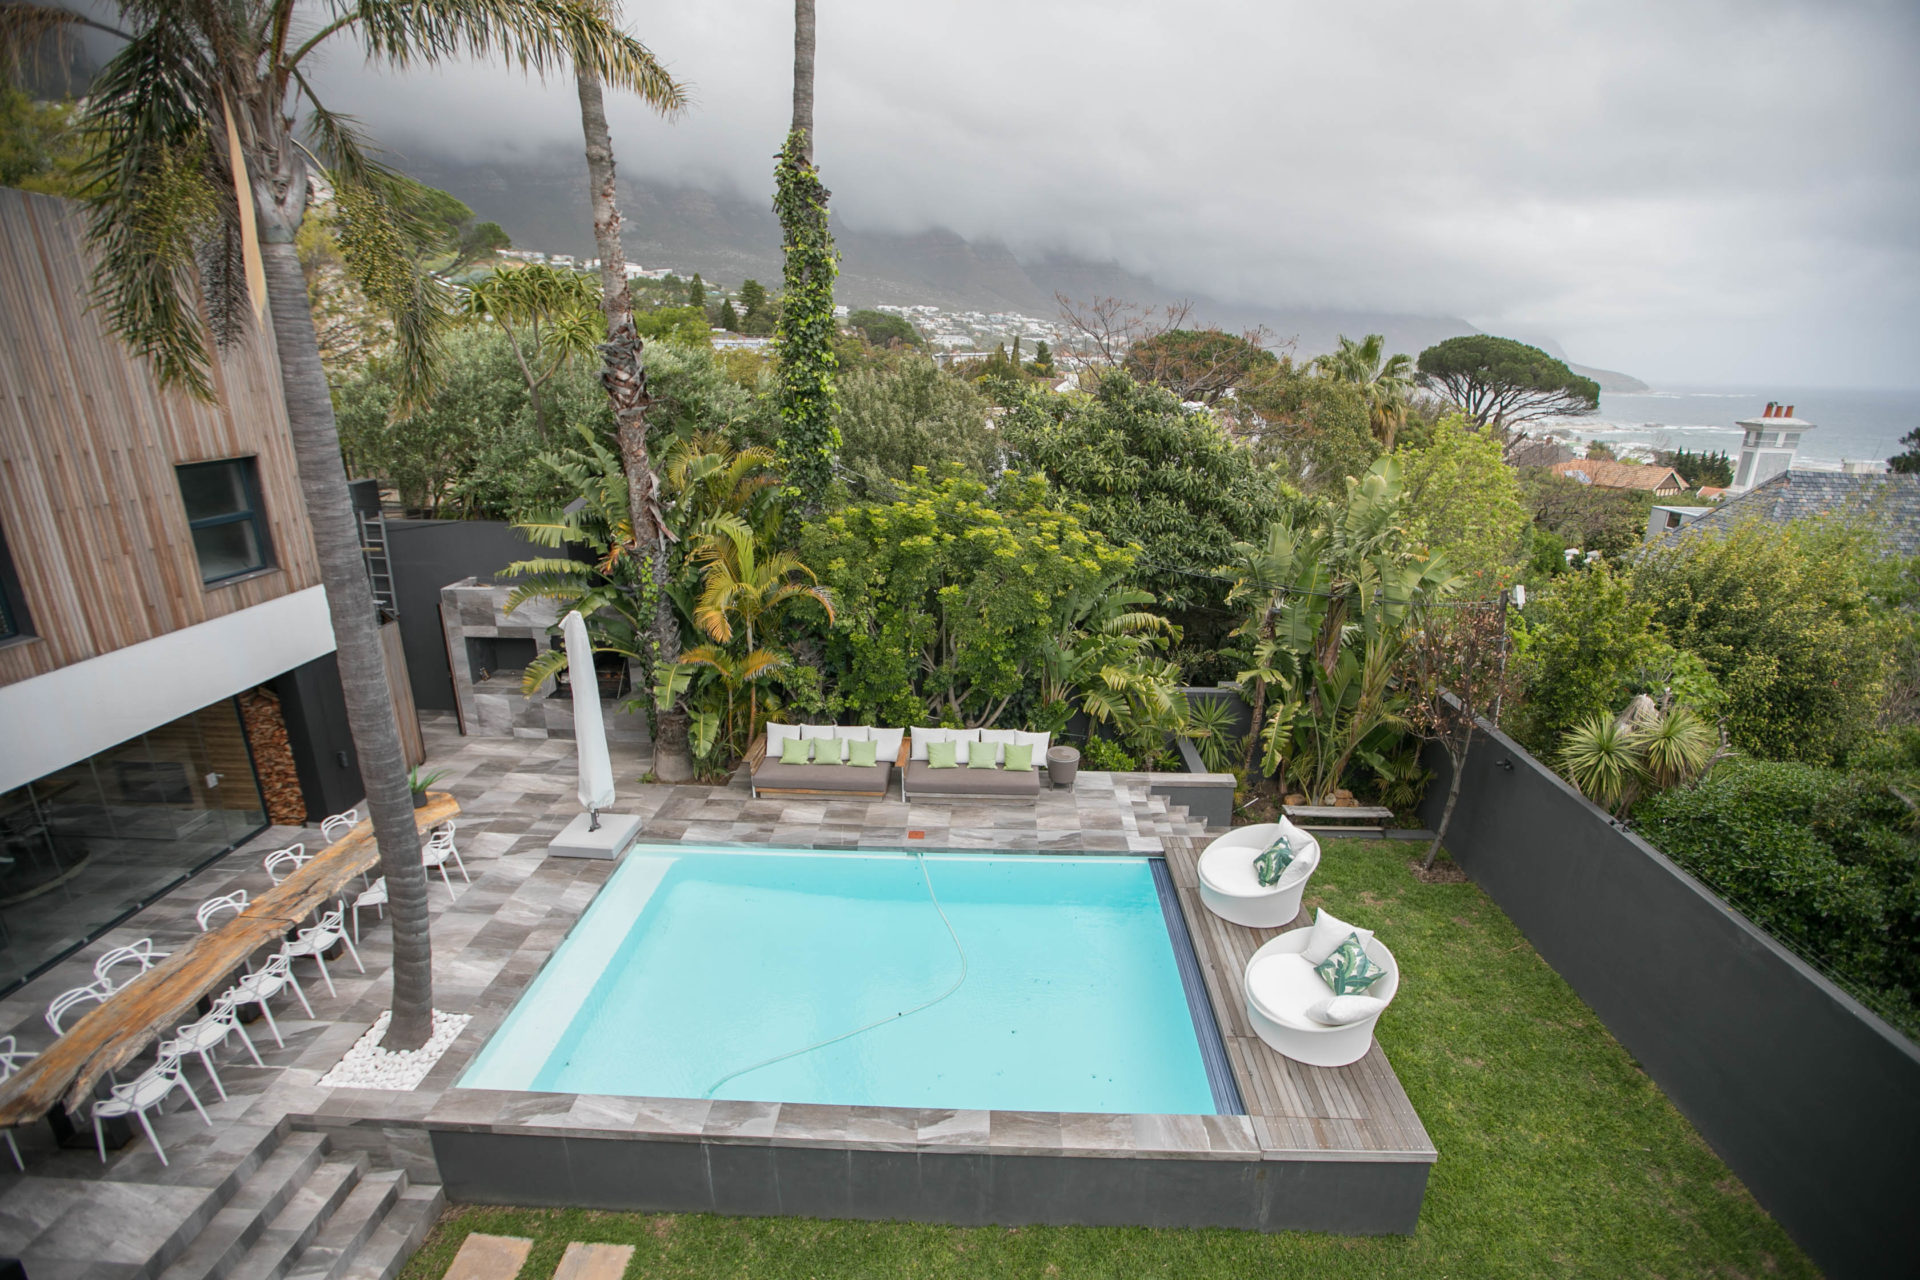 Photo 18 of Glen Hideaway accommodation in Camps Bay, Cape Town with 6 bedrooms and 6 bathrooms